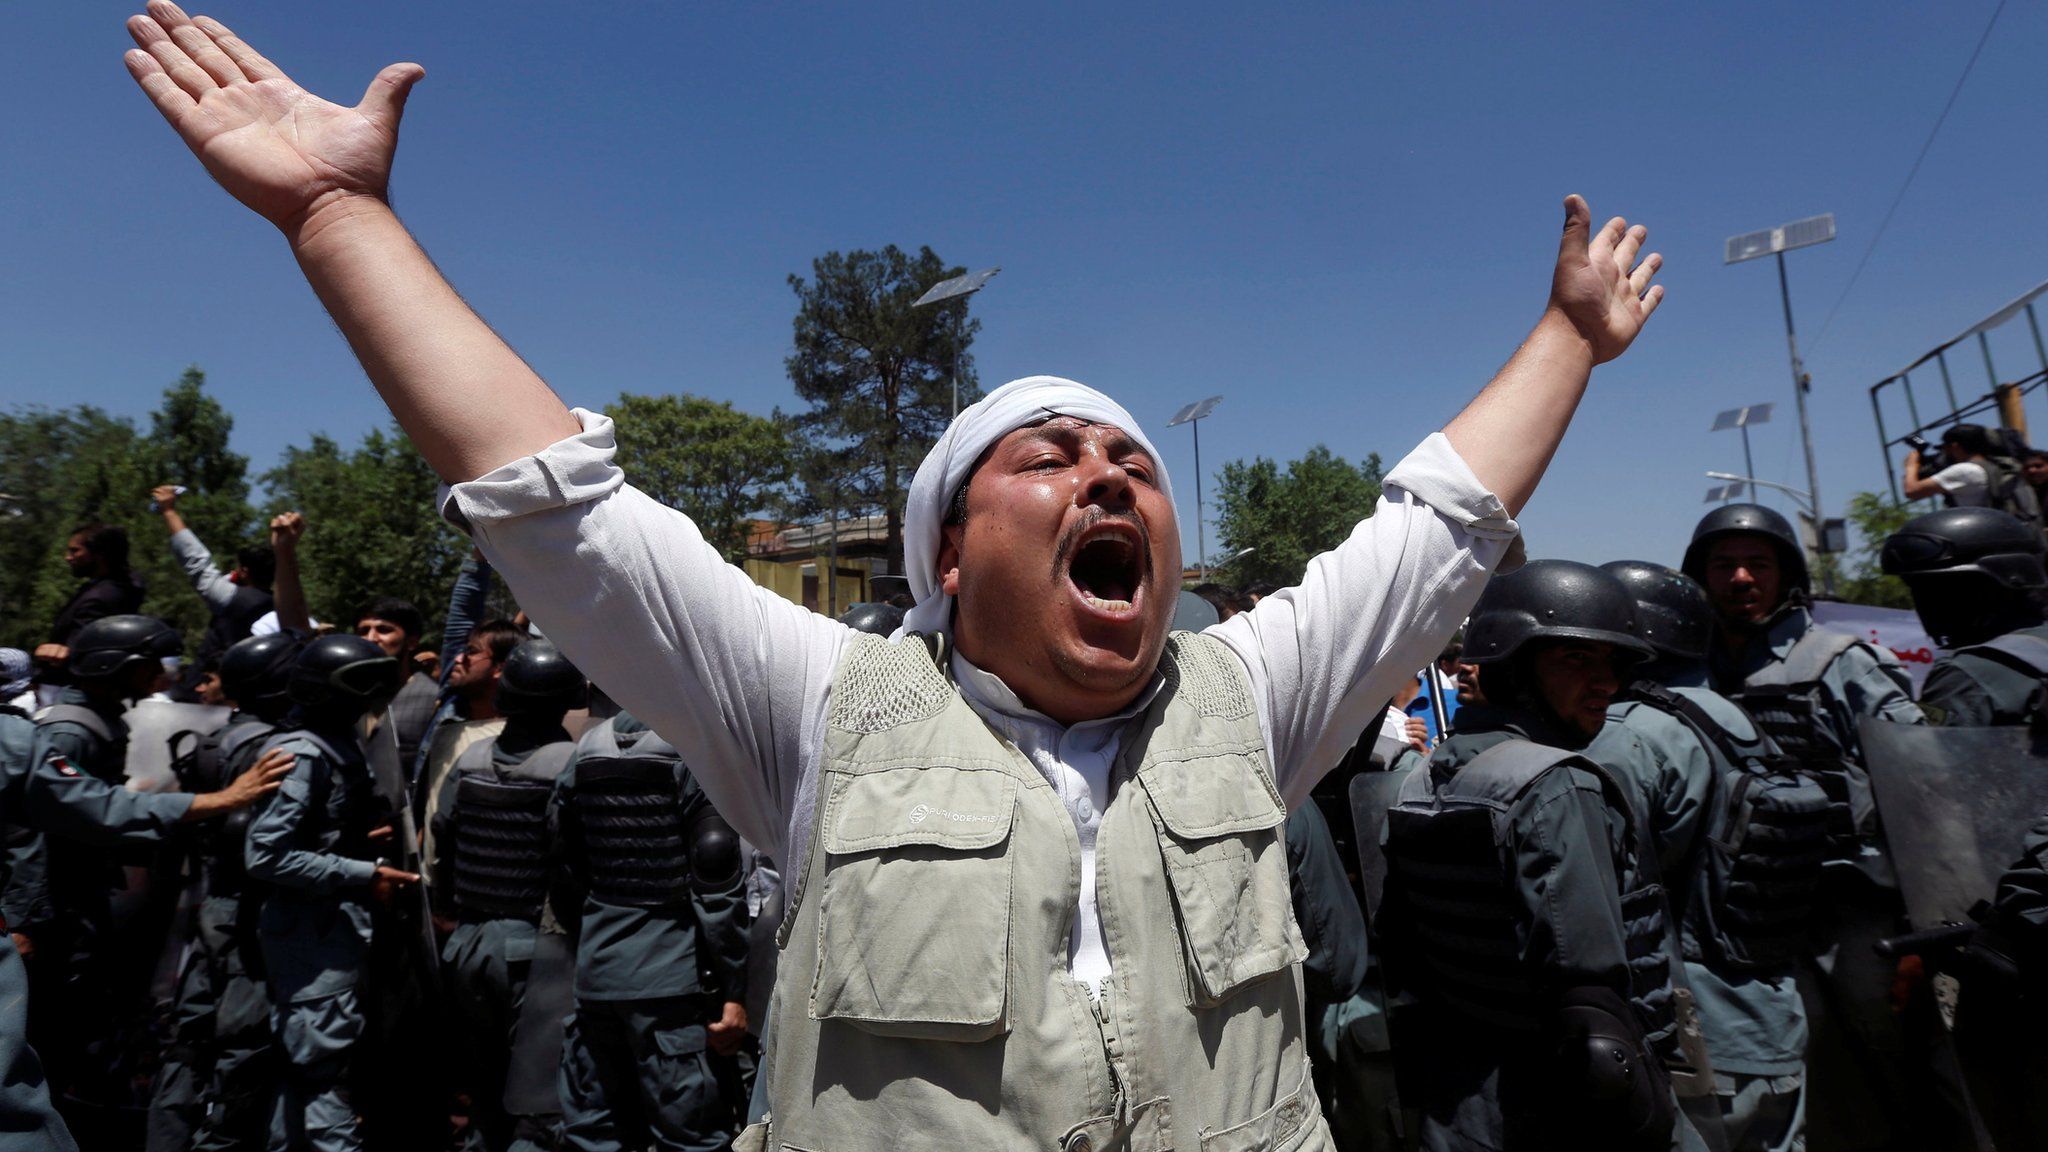 An Afghan man chants slogans, during a protest in Kabul, Afghanistan 2 June 2017